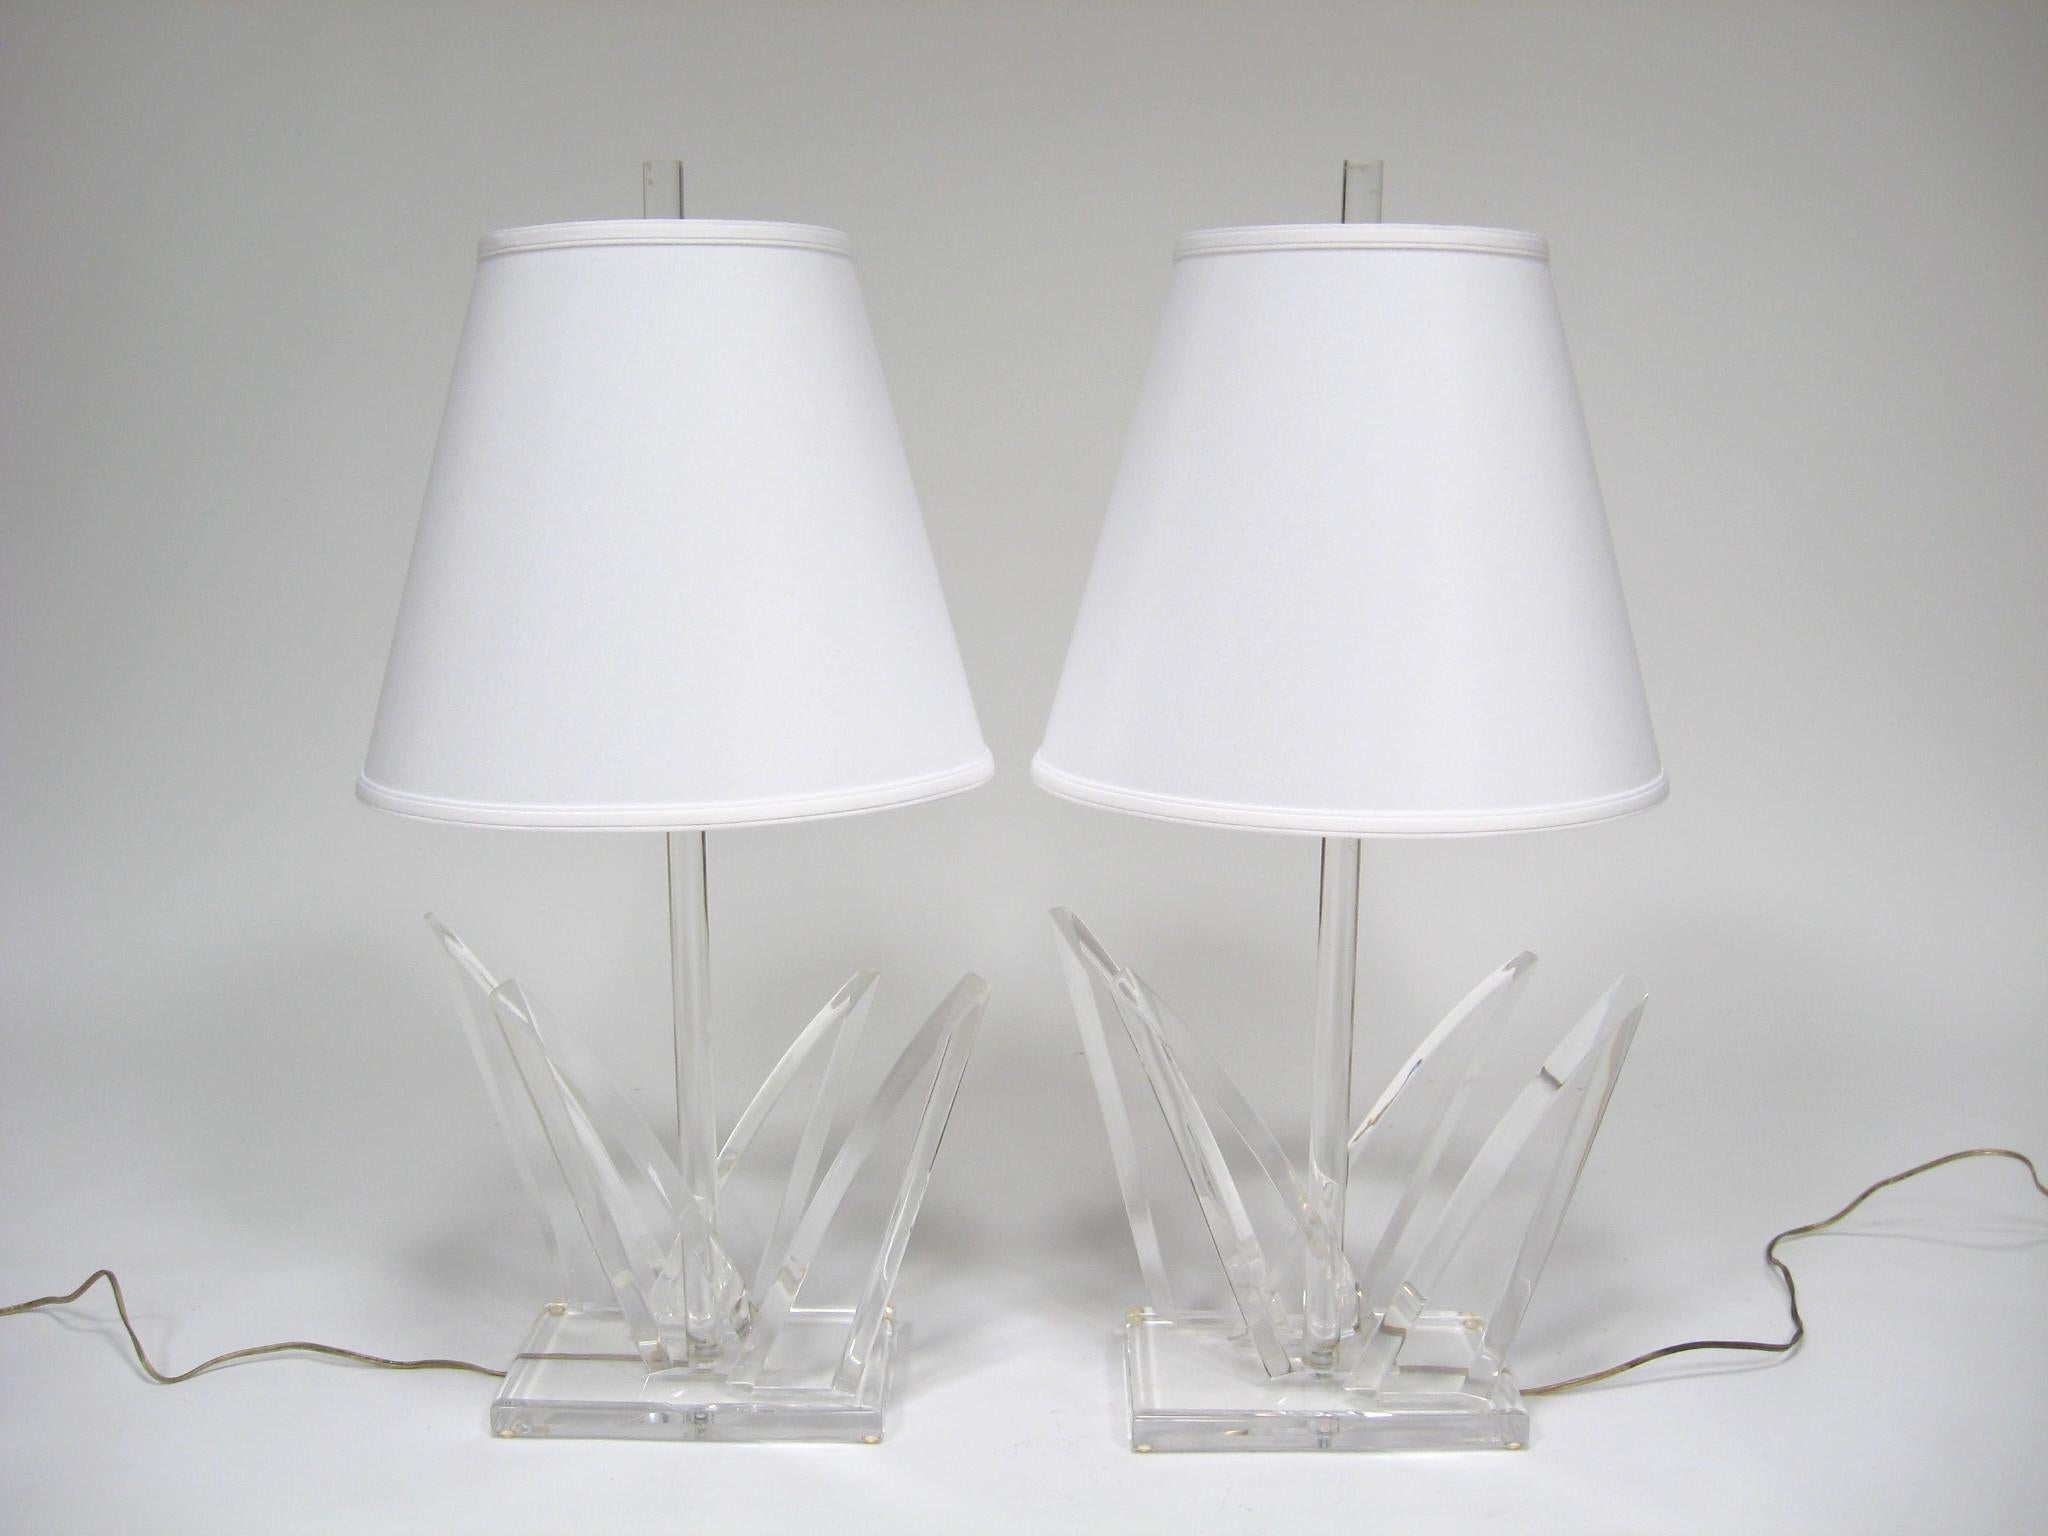 This striking matched pair of Lucite table lamps by Van Teal have style to spare. The dramatic clear lucite bases each have four angular elements and a round central stem that conceals the wire. They are each hand signed on the base.

The lamp bases